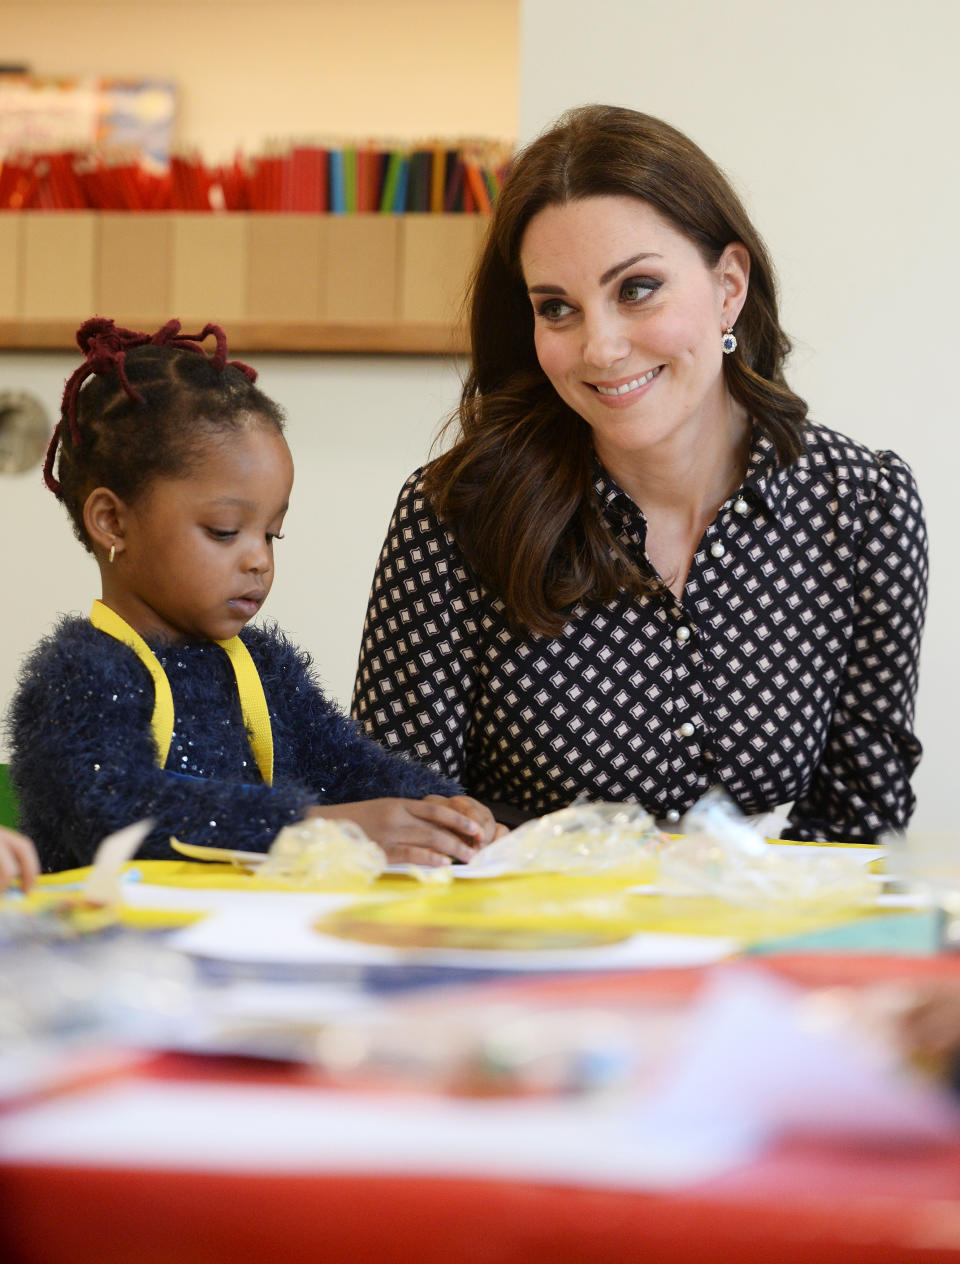 Britain’s Catherine, The Duchess of Cambridge, visits the Foundling Museum in London, November 28, 2017. REUTERS/Mary Turner